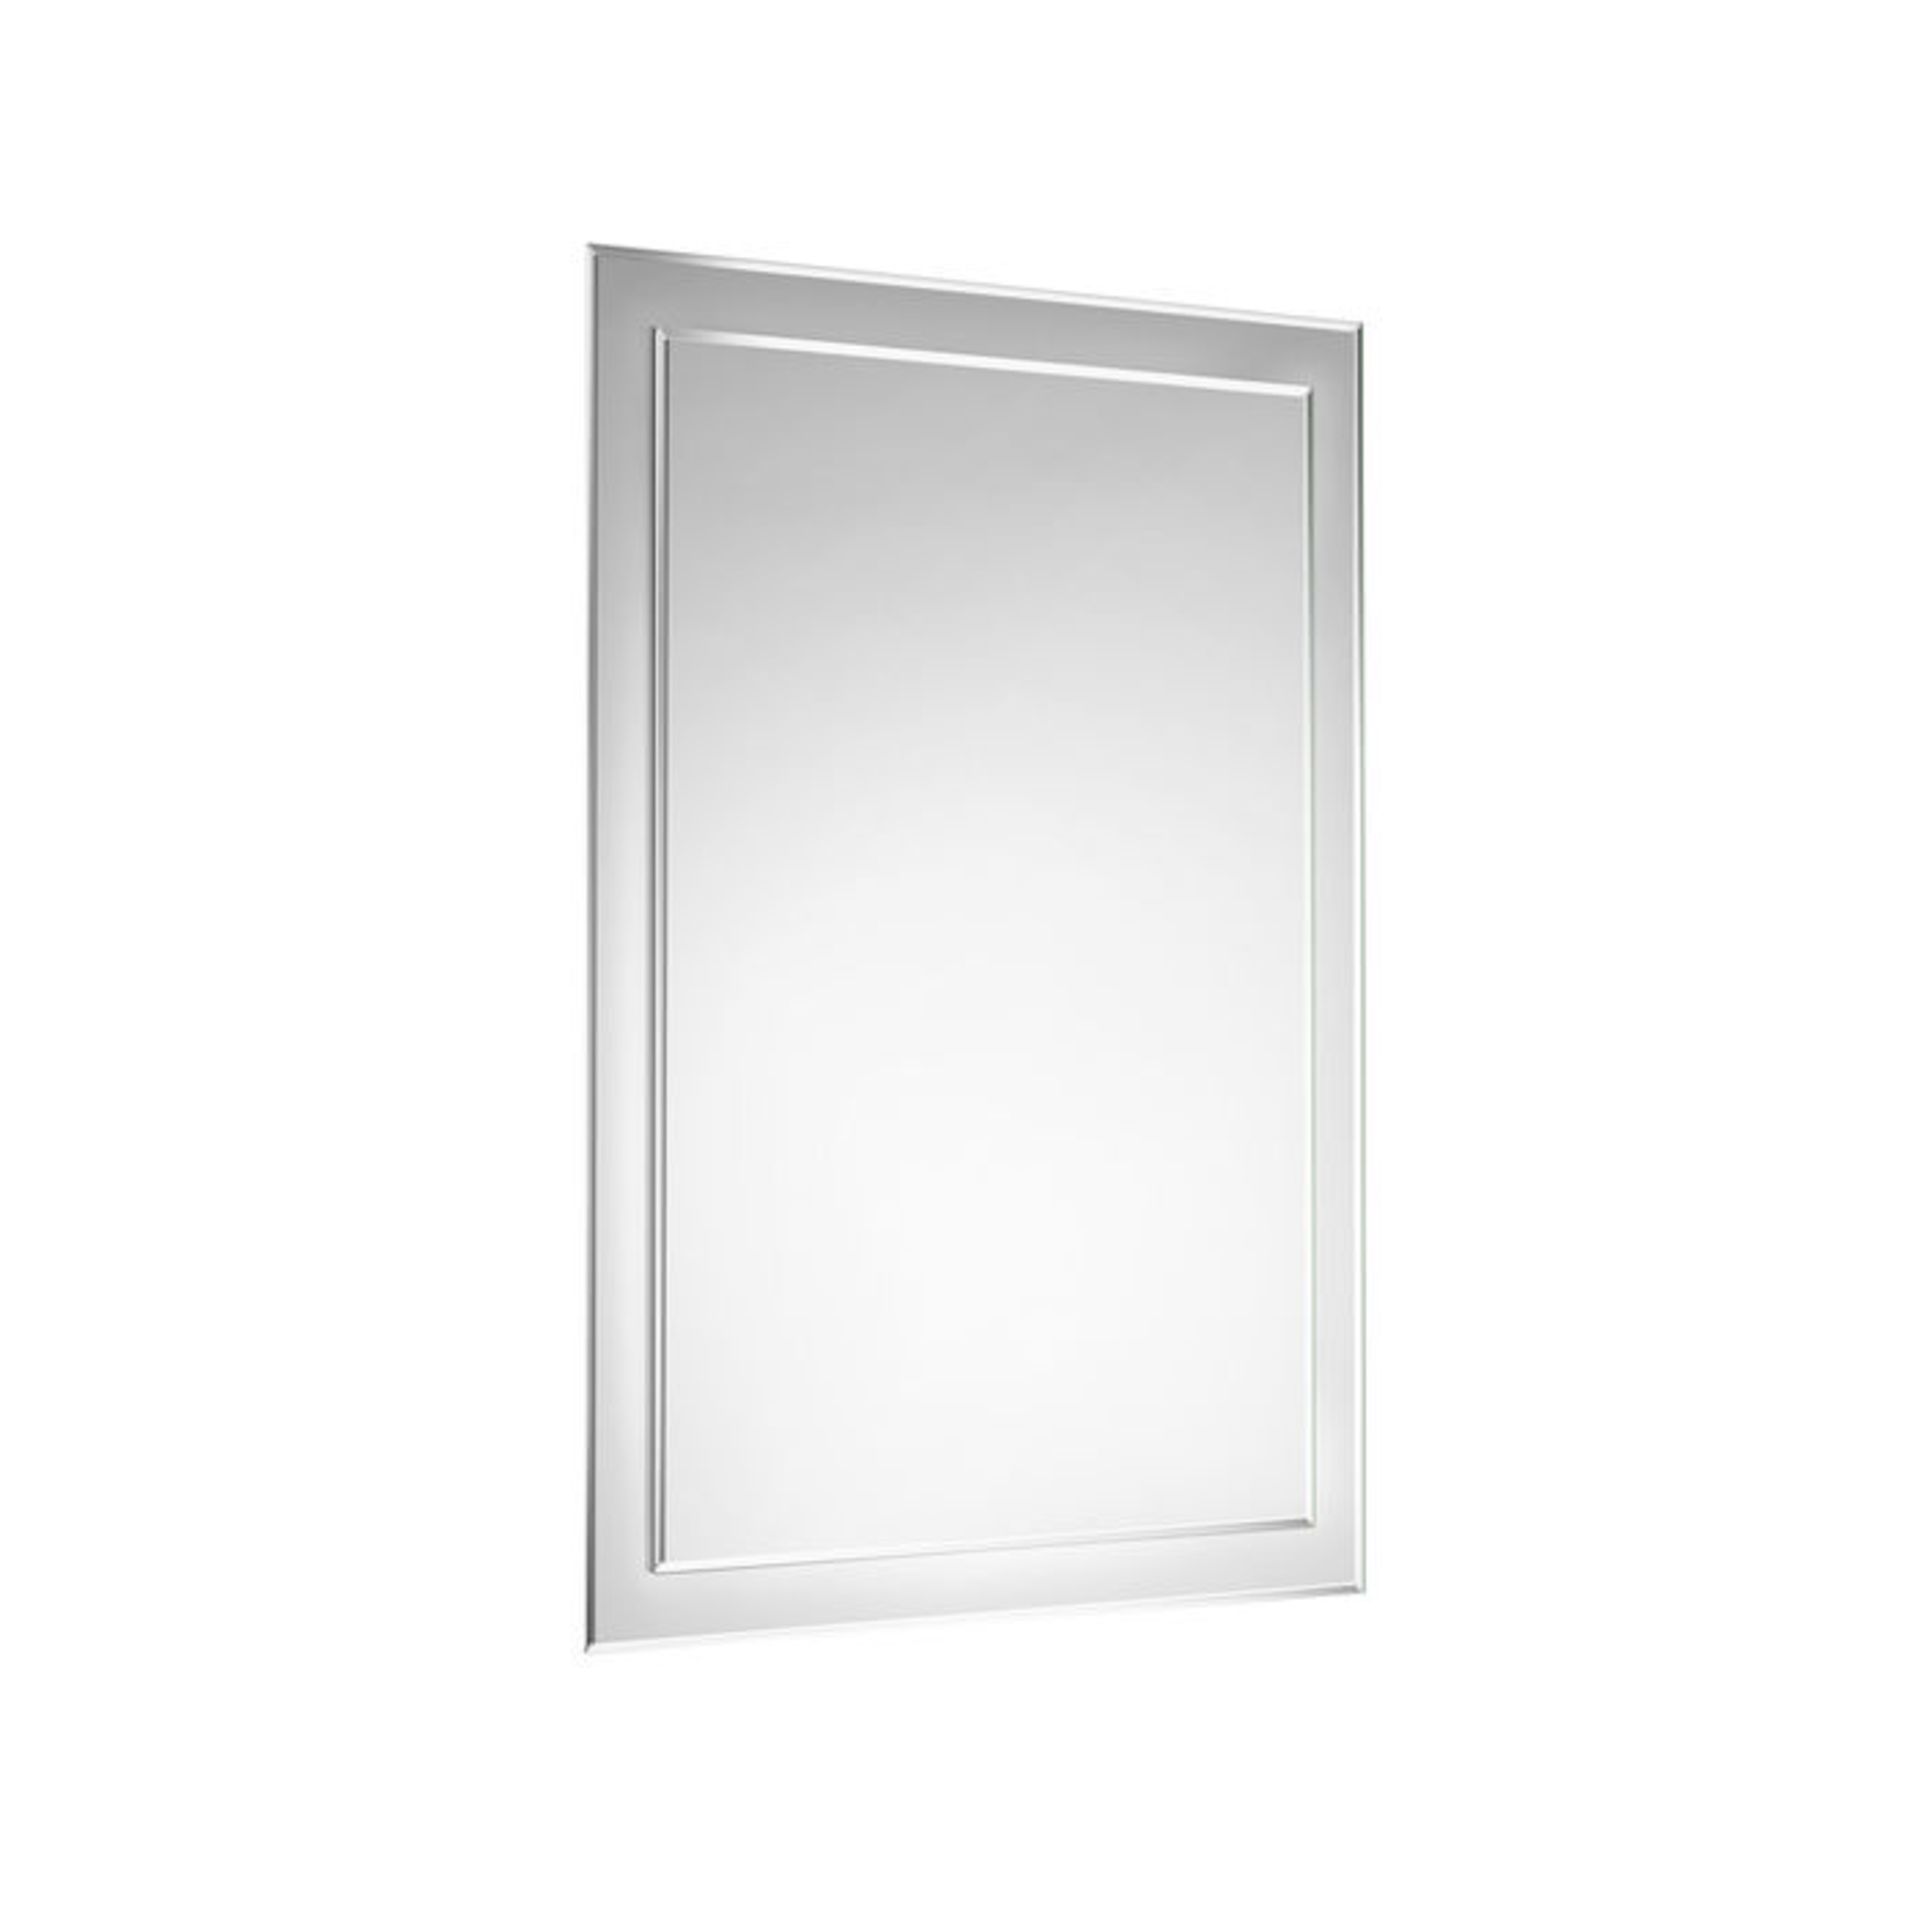 (SA211) 500x700mm Bevel Mirror. Comes fully assembled for added convenience Versatile with a